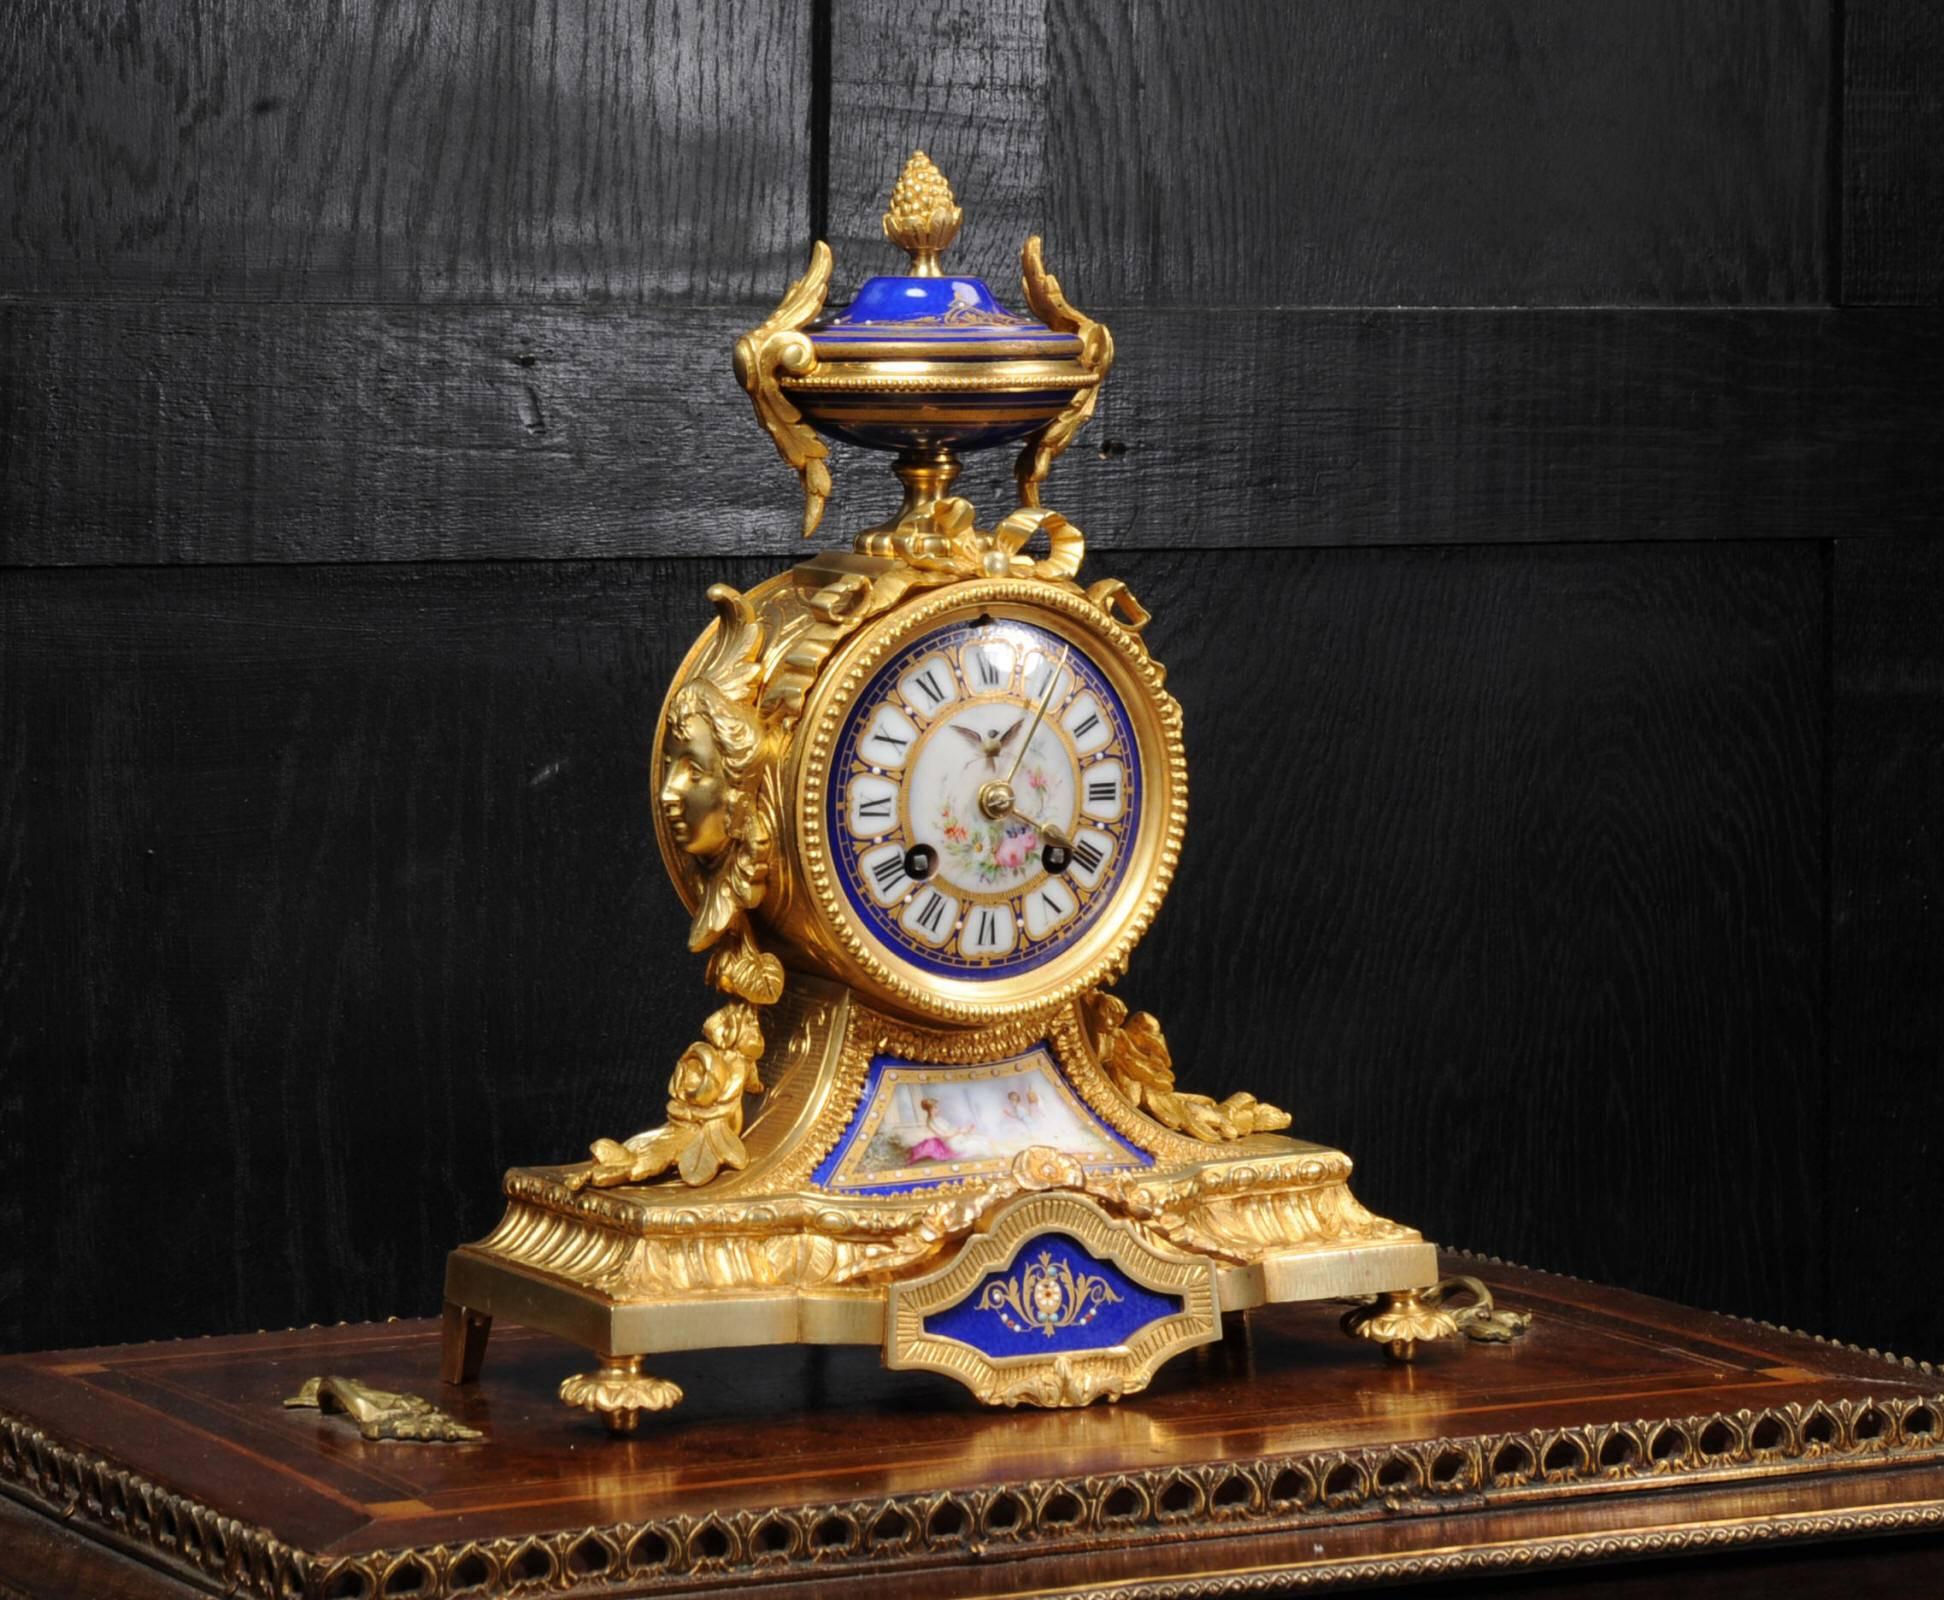 A most exquisite original antique French clock by the famous maker Japy Freres. It is finely modelled in ormolu (finely gilded bronze), beautifully finished and in stunning condition. It is mounted with beautiful Sevres style porcelain, each piece